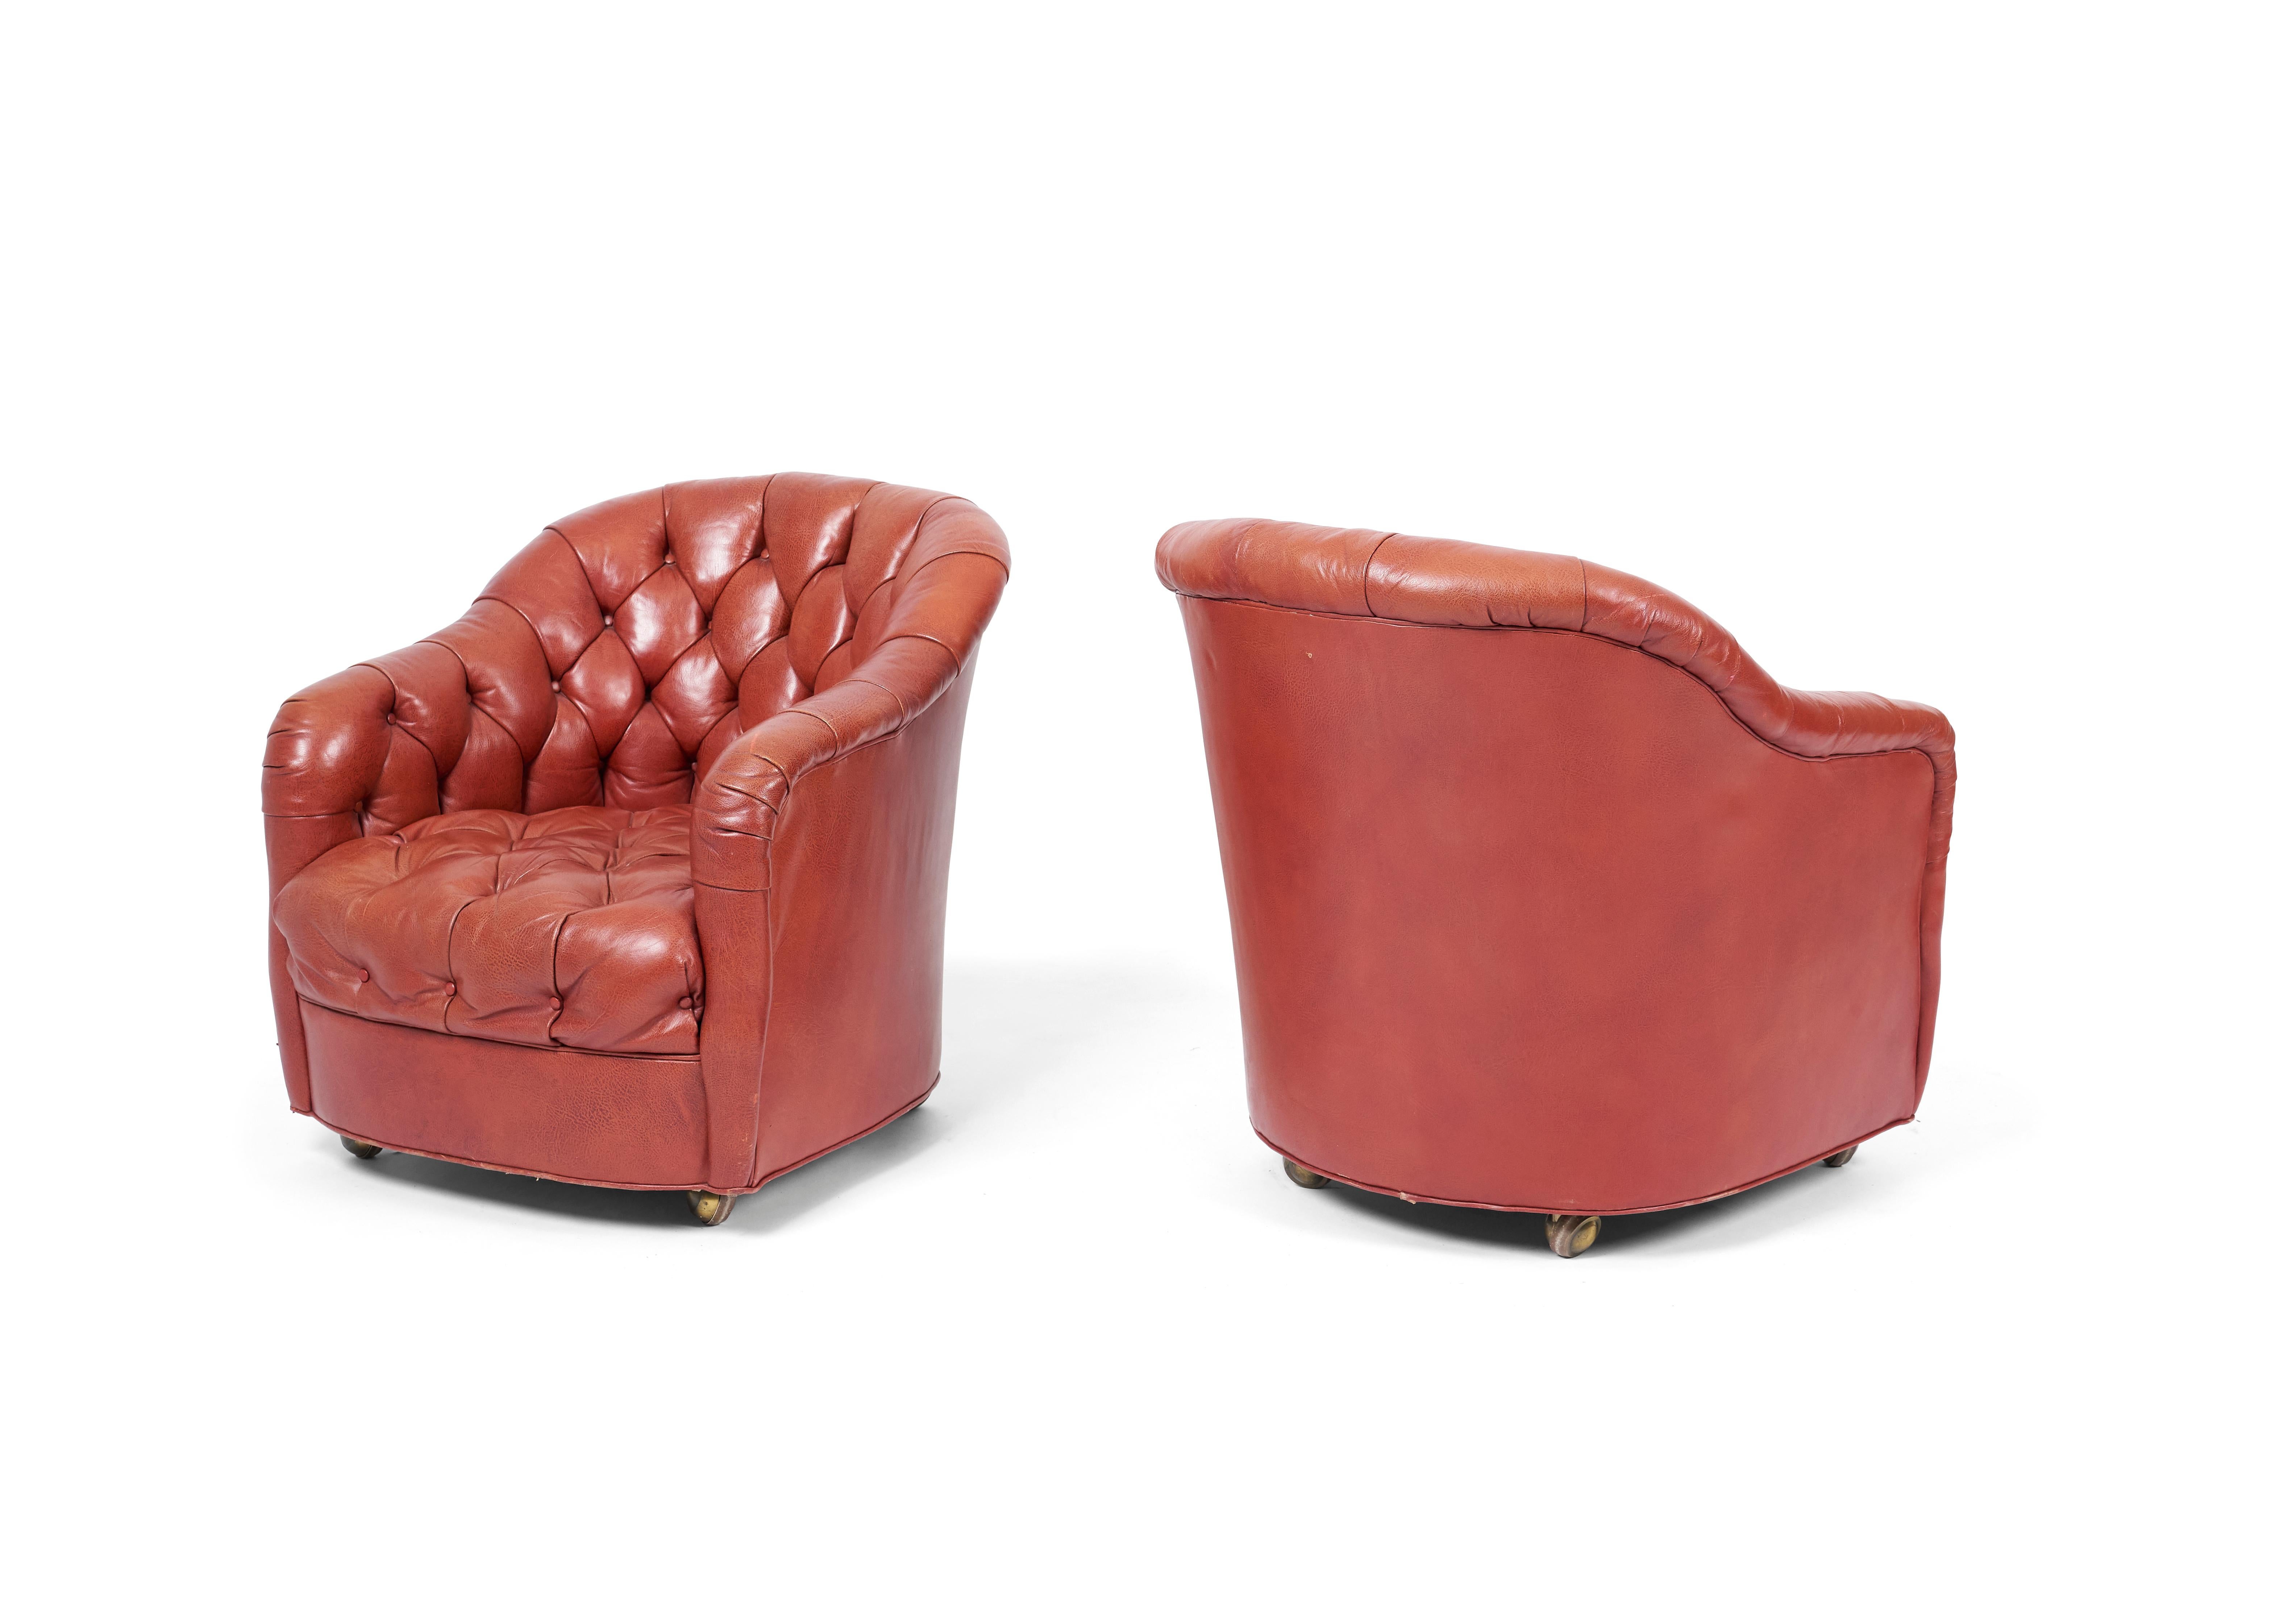 Mid-20th Century Ward Bennett Tufted Club Chairs, Original Red Leather